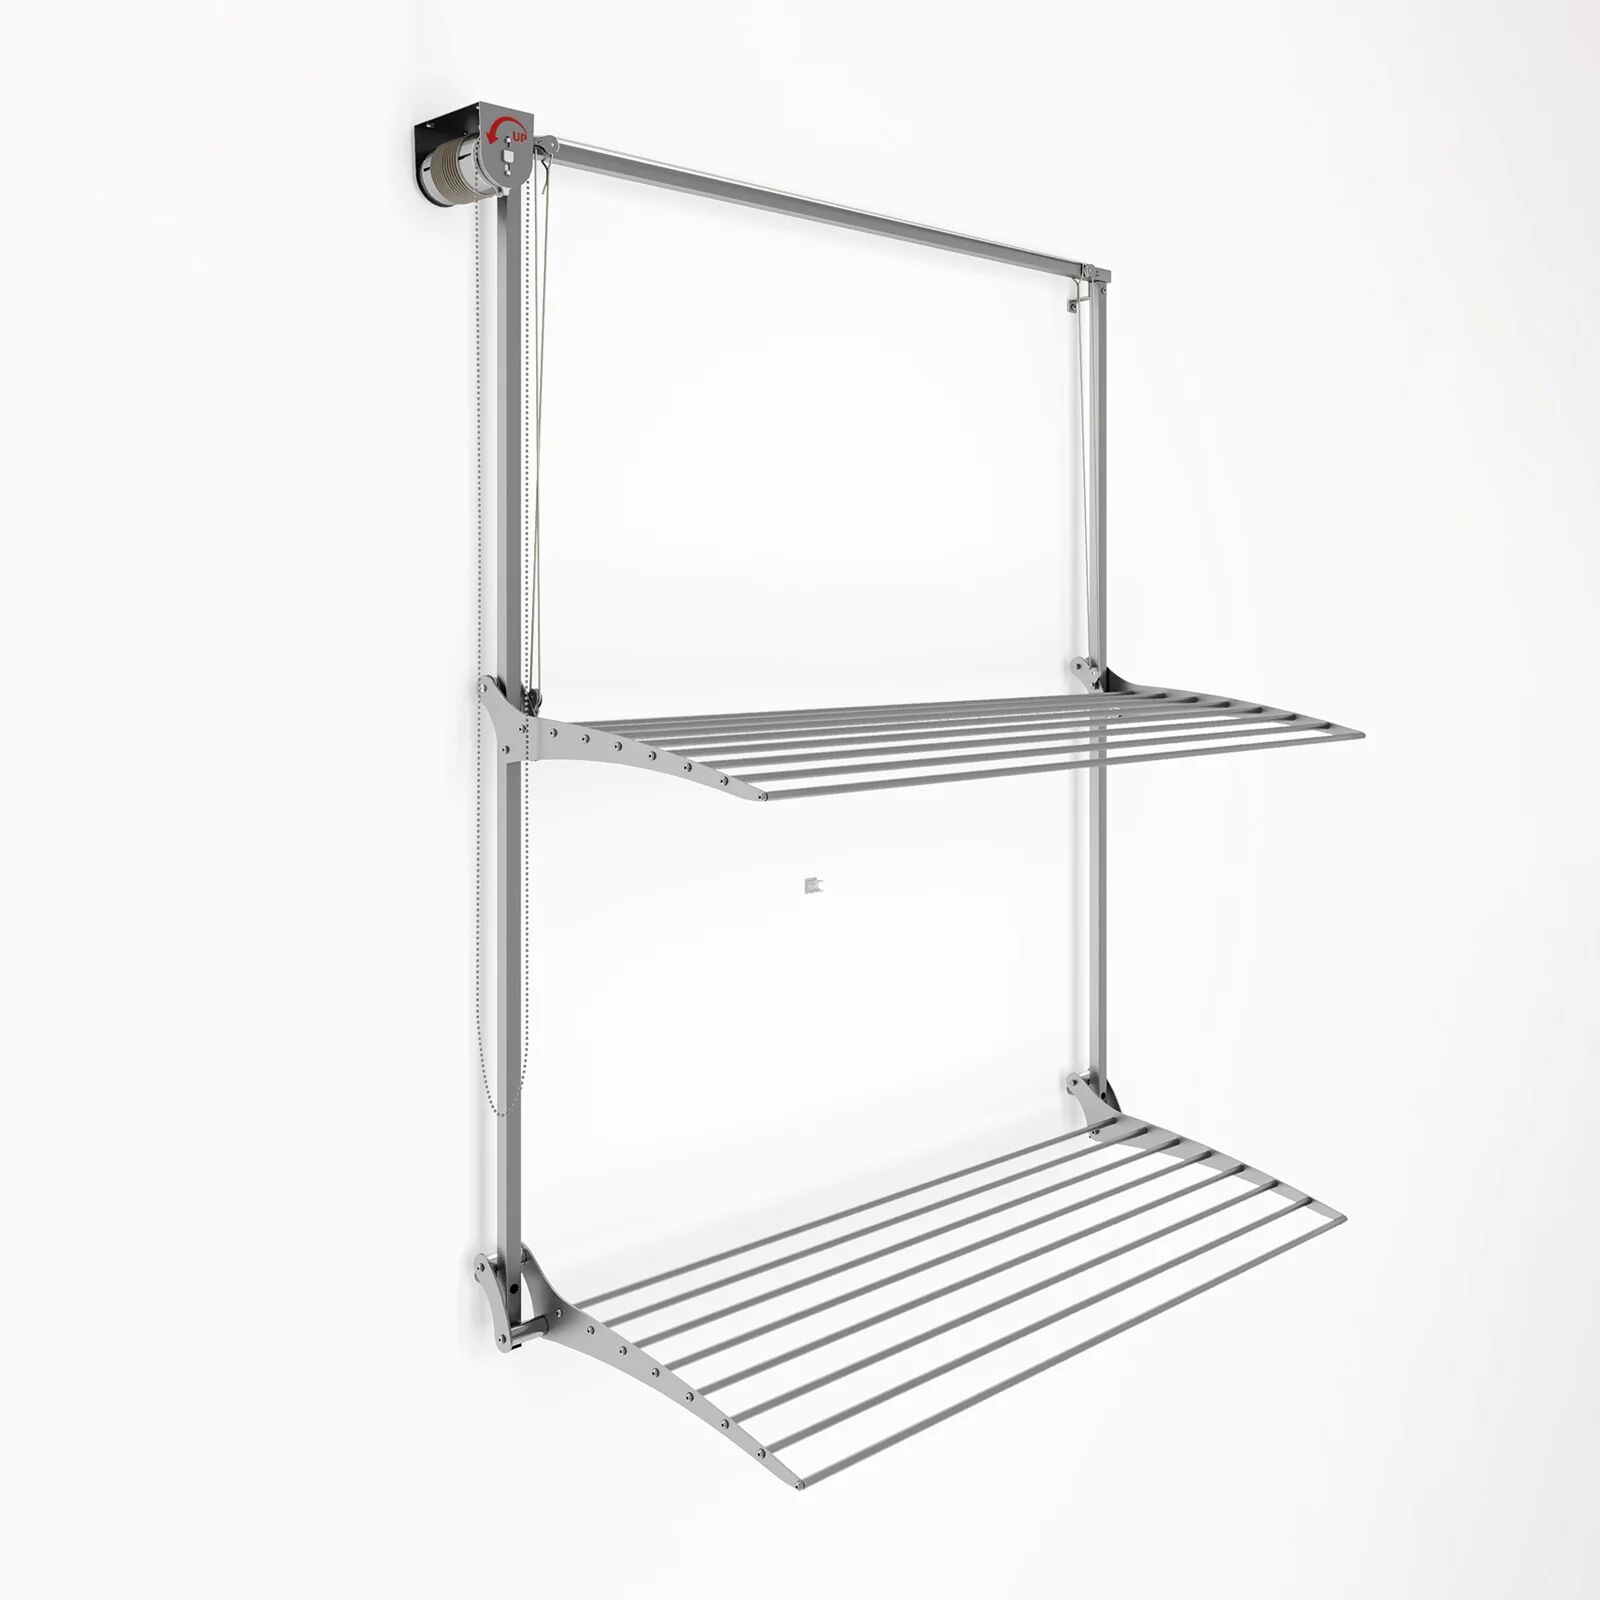 Foxydry Wall Plus 80 wall-mounted space-saving drying rack with two racks